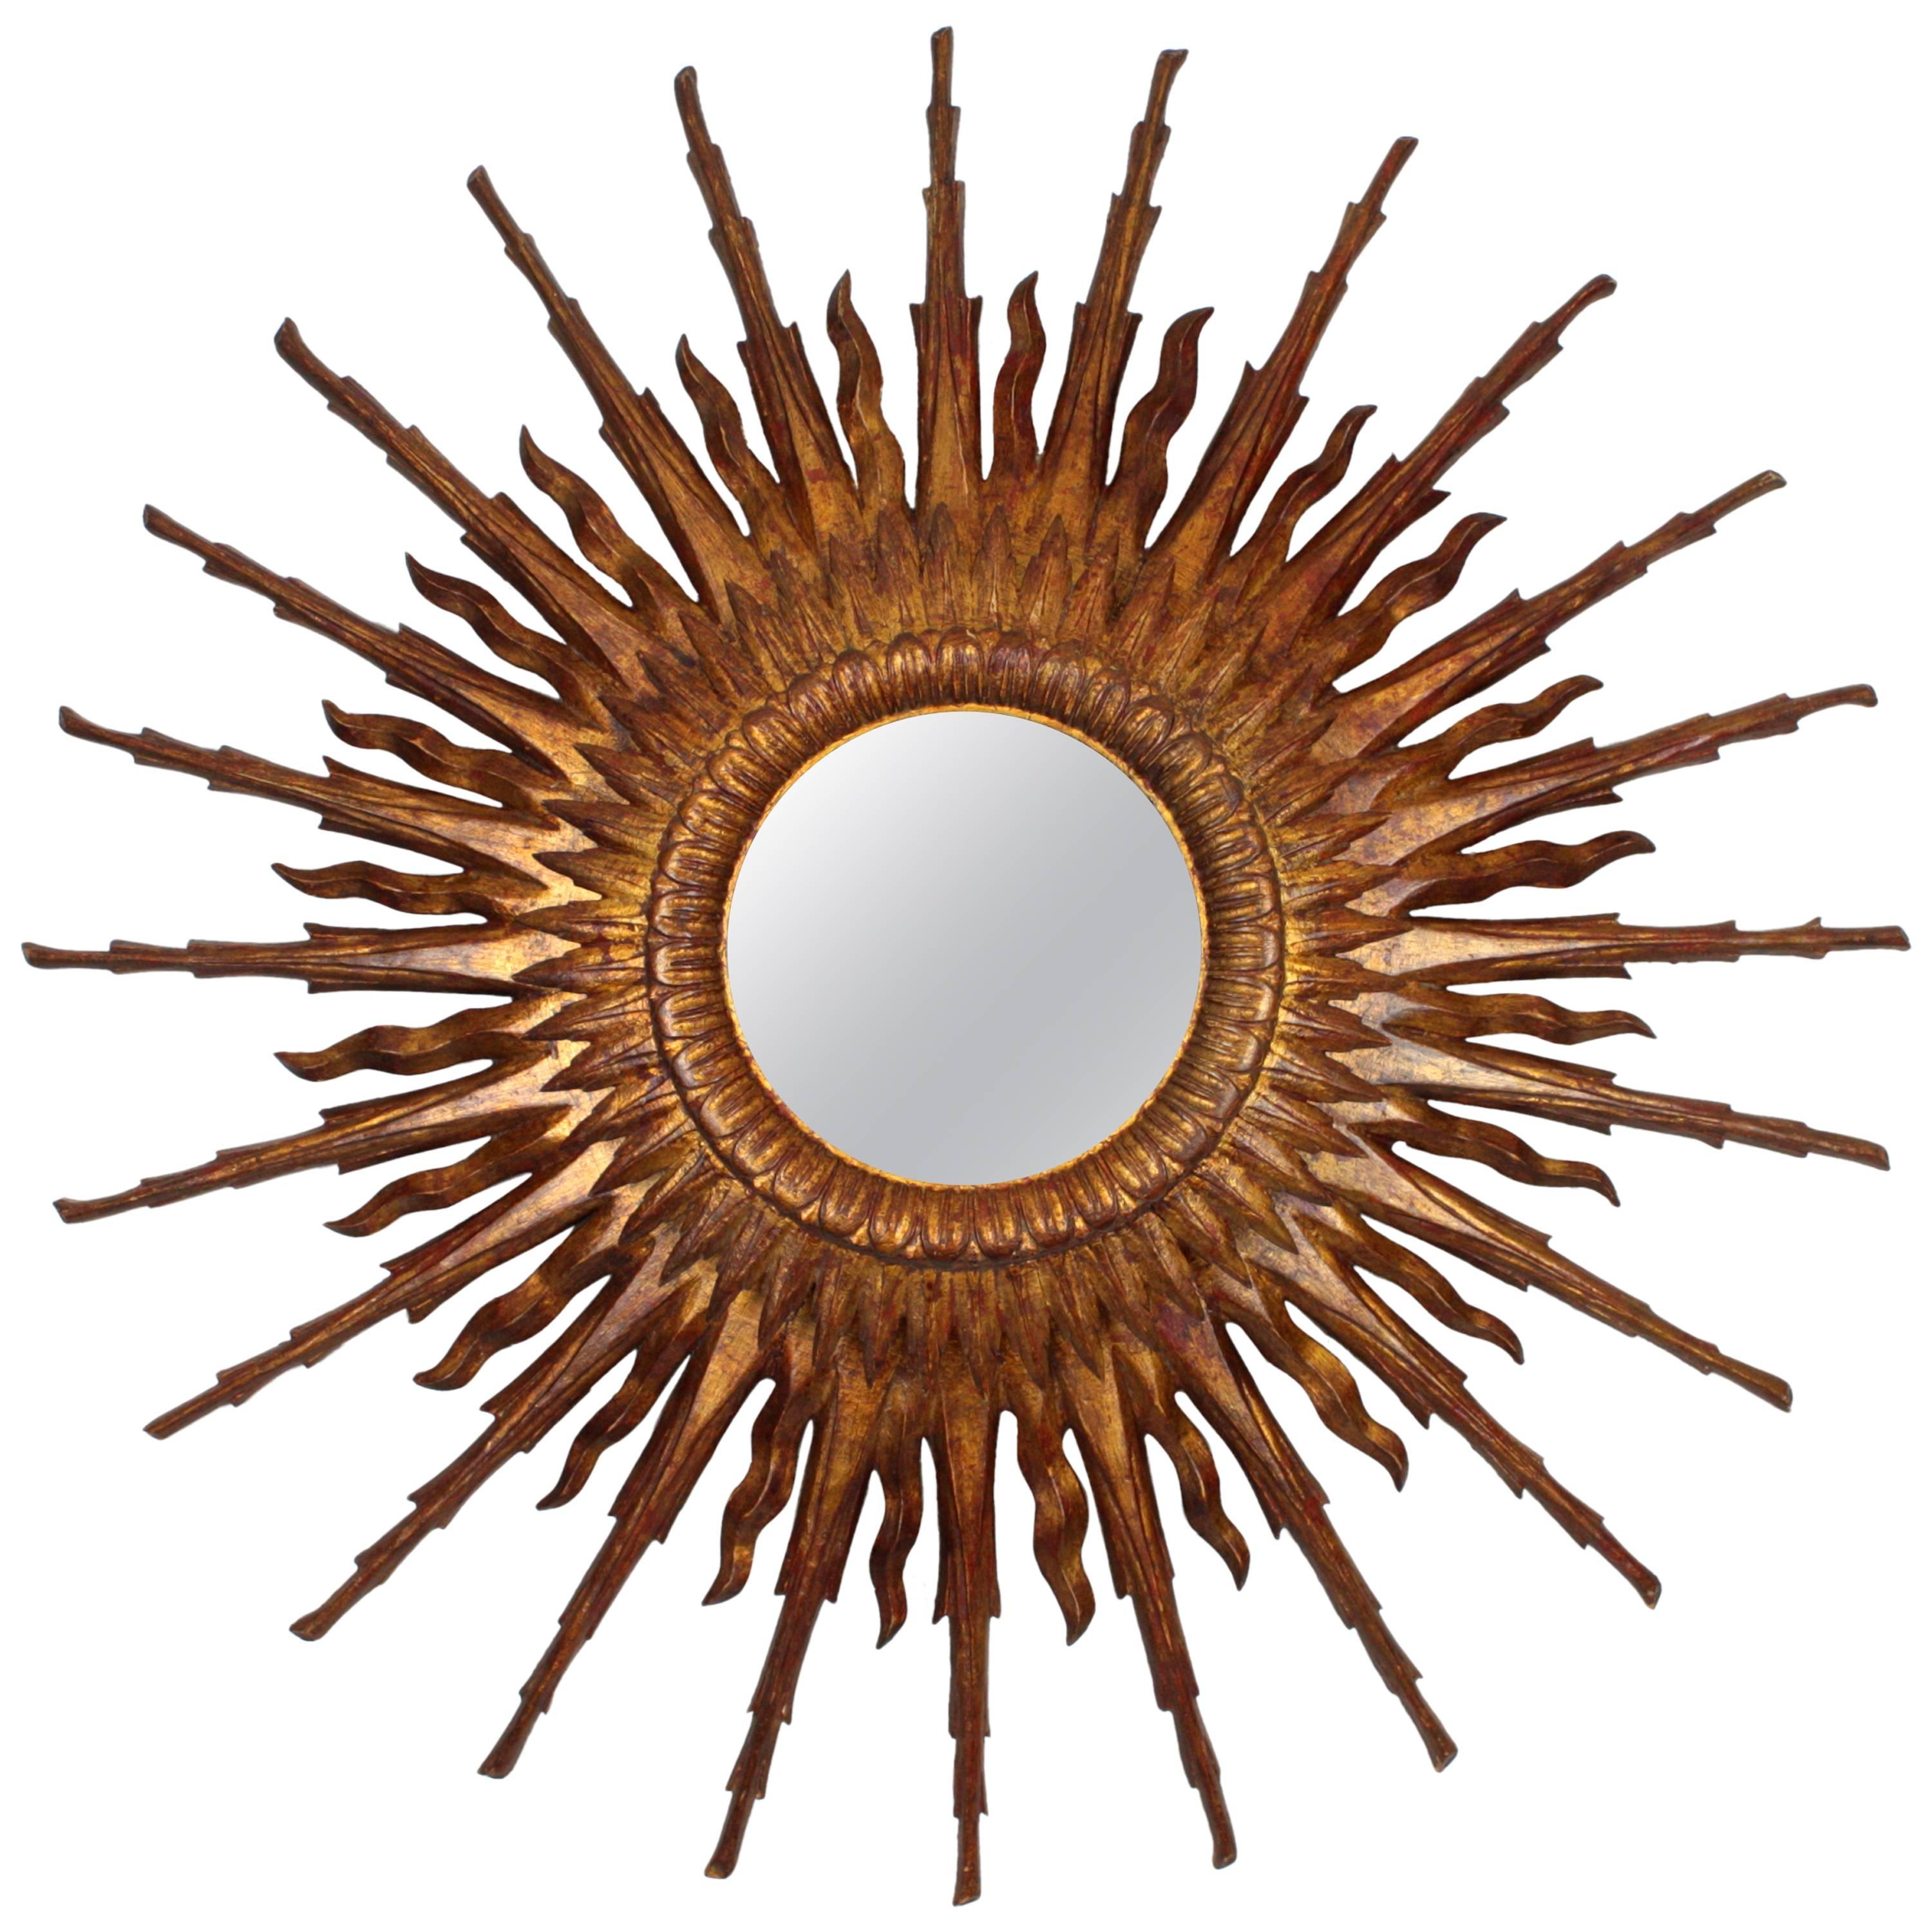 An spectacular giant sized sunburst flush mount or ceiling light fixture in Baroque style made in Spain at the Mid-20th century. Unusual extra large size with two layers of beams in different sizes that make this piece gorgeous and highly decorative